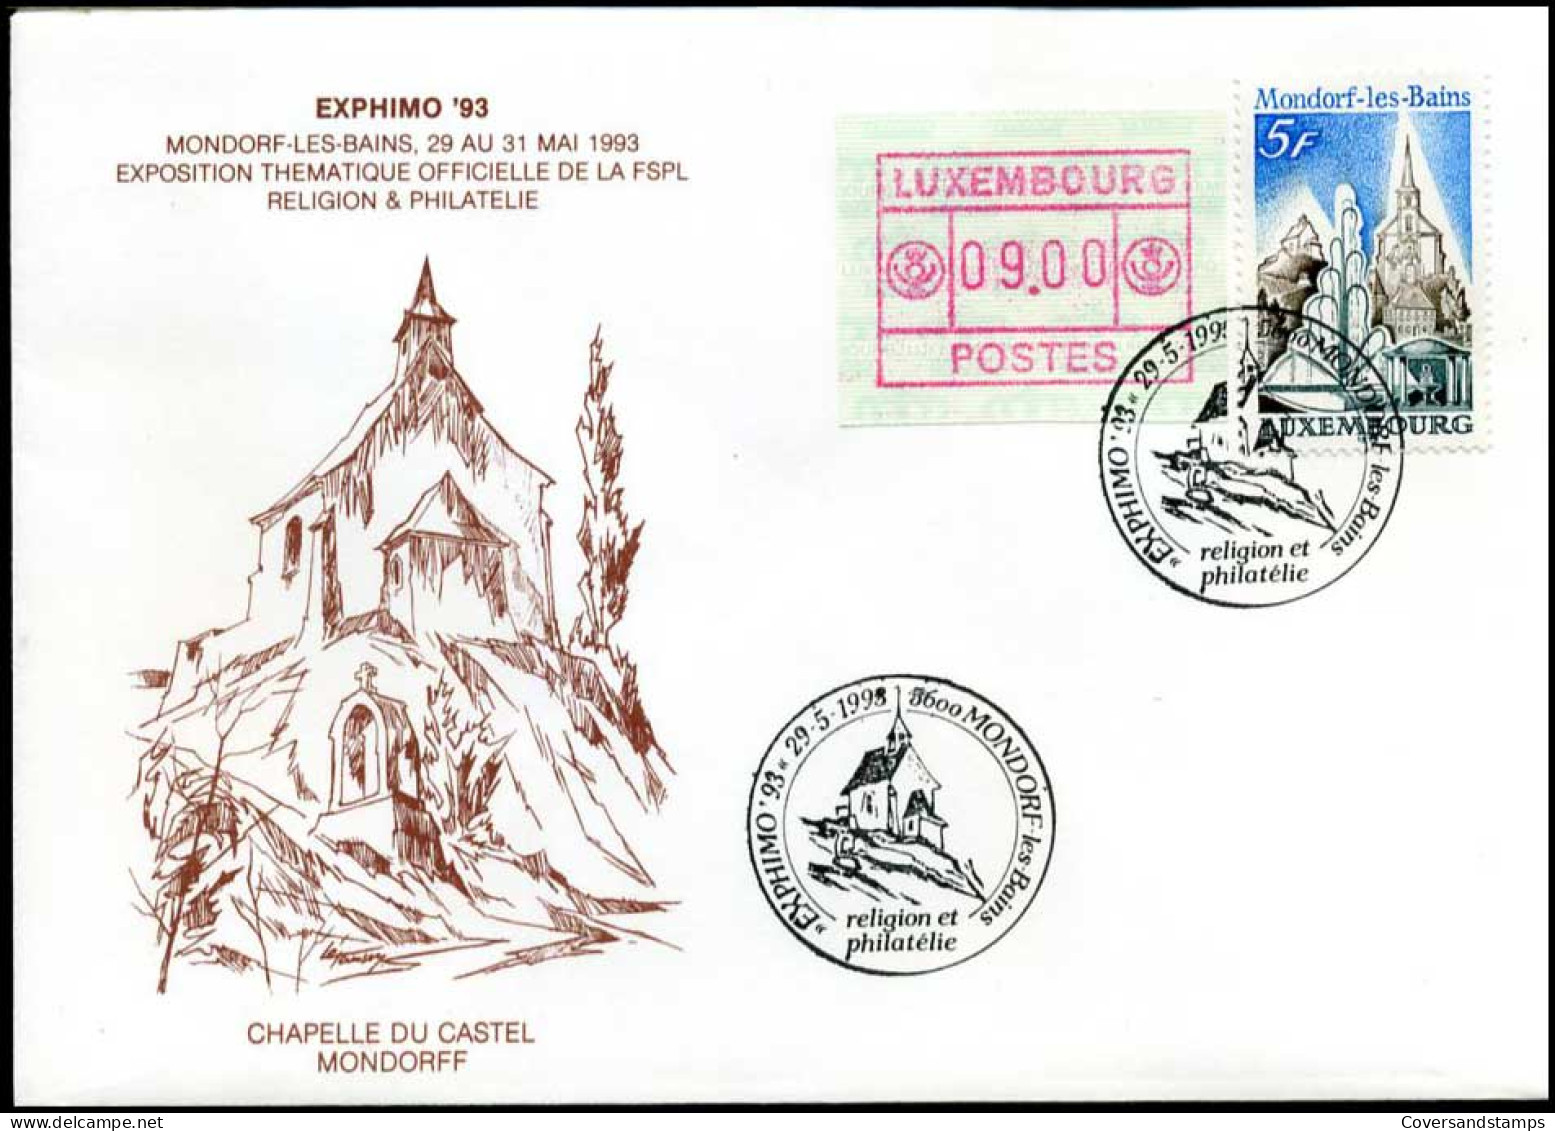 Luxembourg - FDC -  Mondorf-les-Bains - FDC